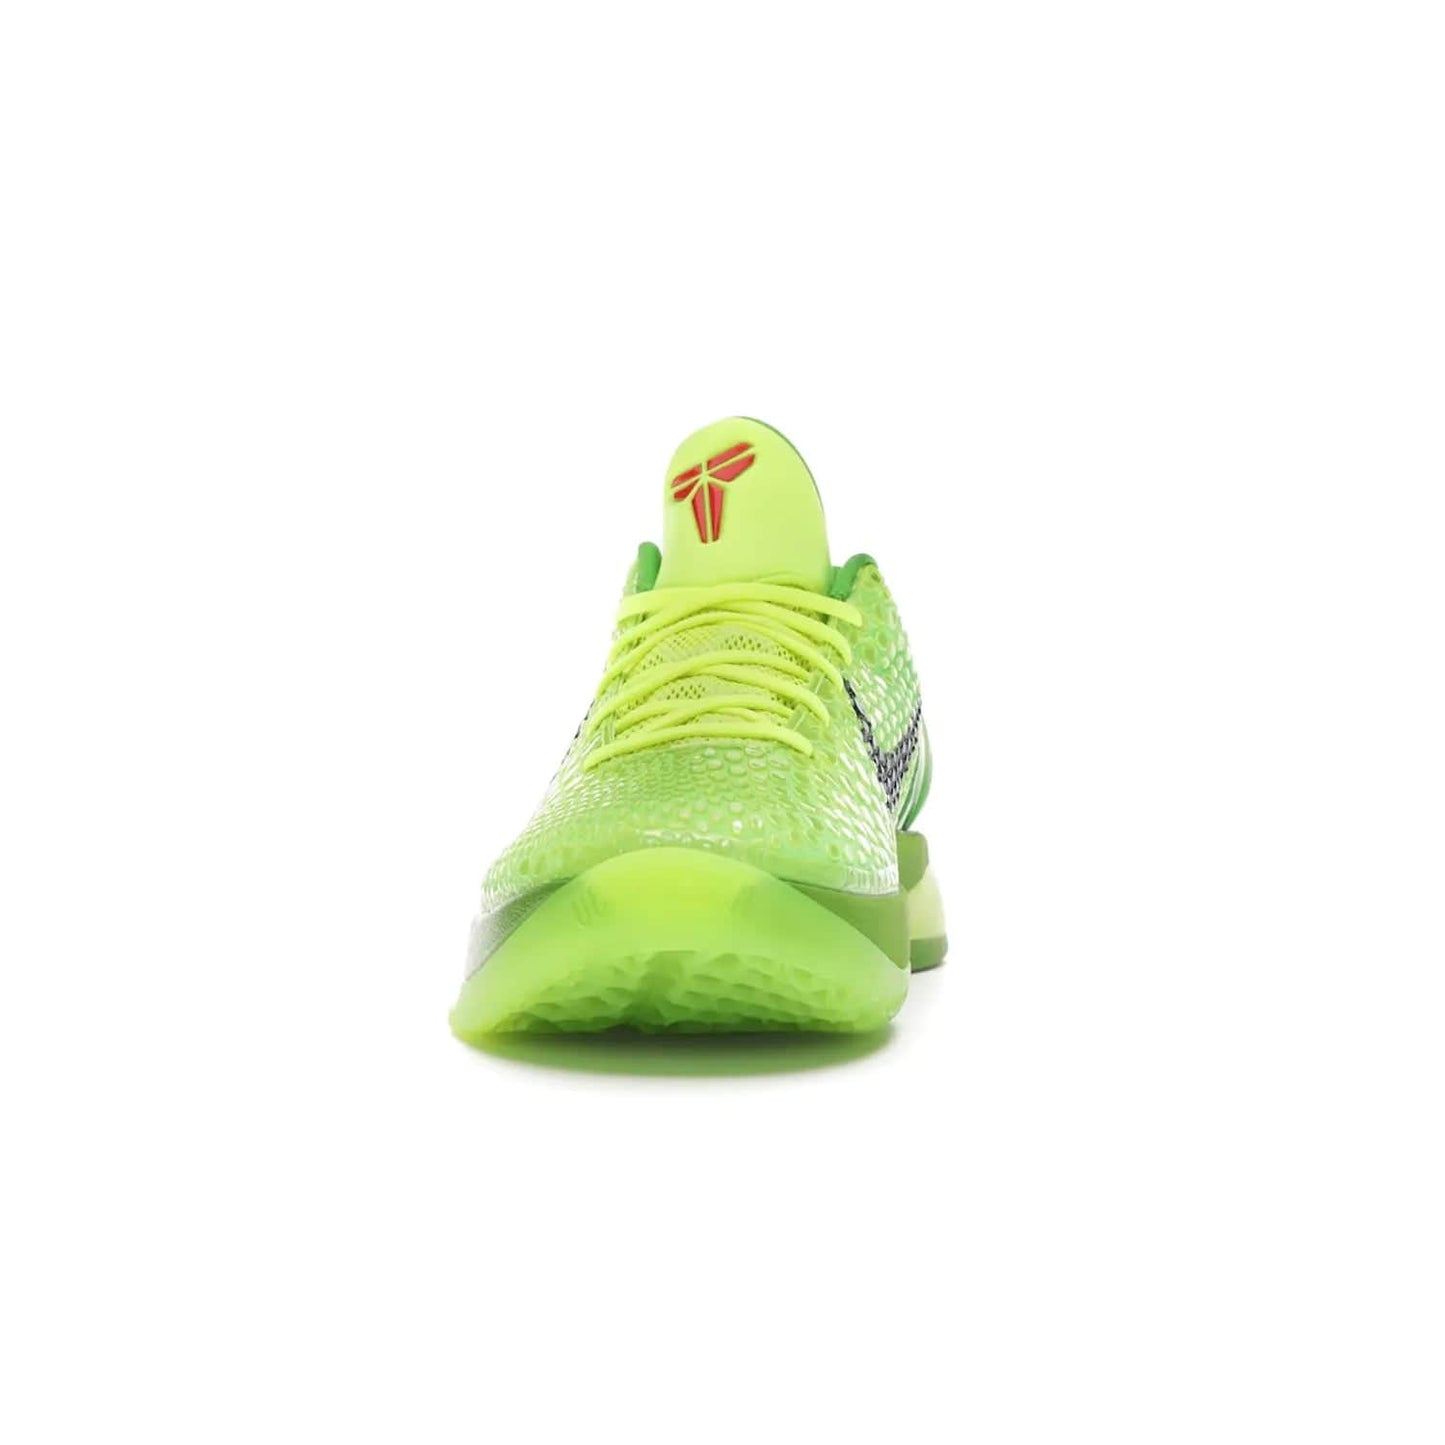 Nike Kobe 6 Protro Grinch (2020) - Image 11 - Only at www.BallersClubKickz.com - #
The Nike Kobe 6 Protro Grinch updates the iconic 2011 design with modern tech like a Zoom Air cushioning system, scaled-down traction, and updated silhouette. Experience the textured Green Apple and Volt upper plus bright red and green accents for $180.